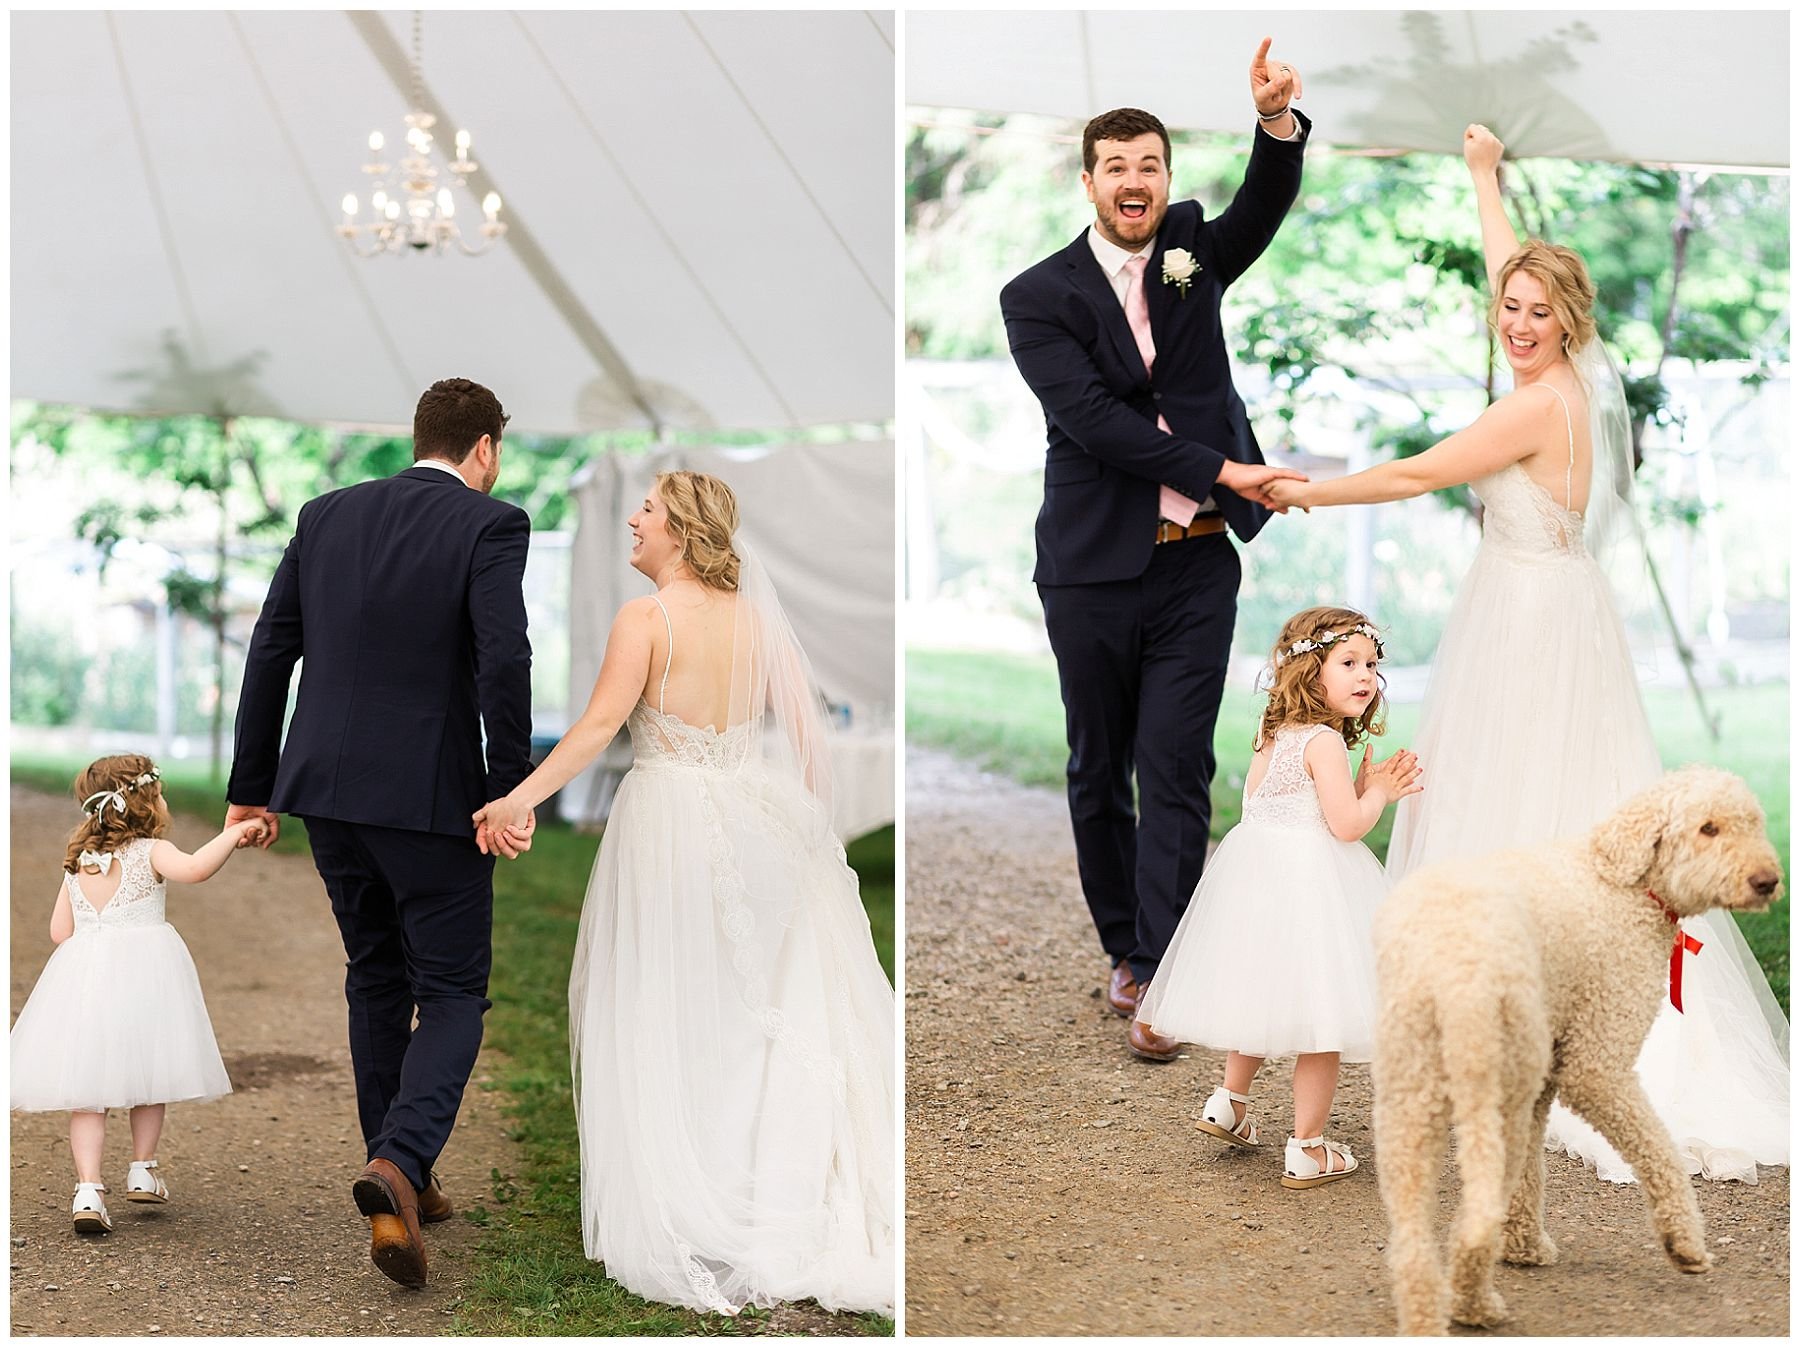 Happy family of three walking down the aisle. Bride, groom and daughter.